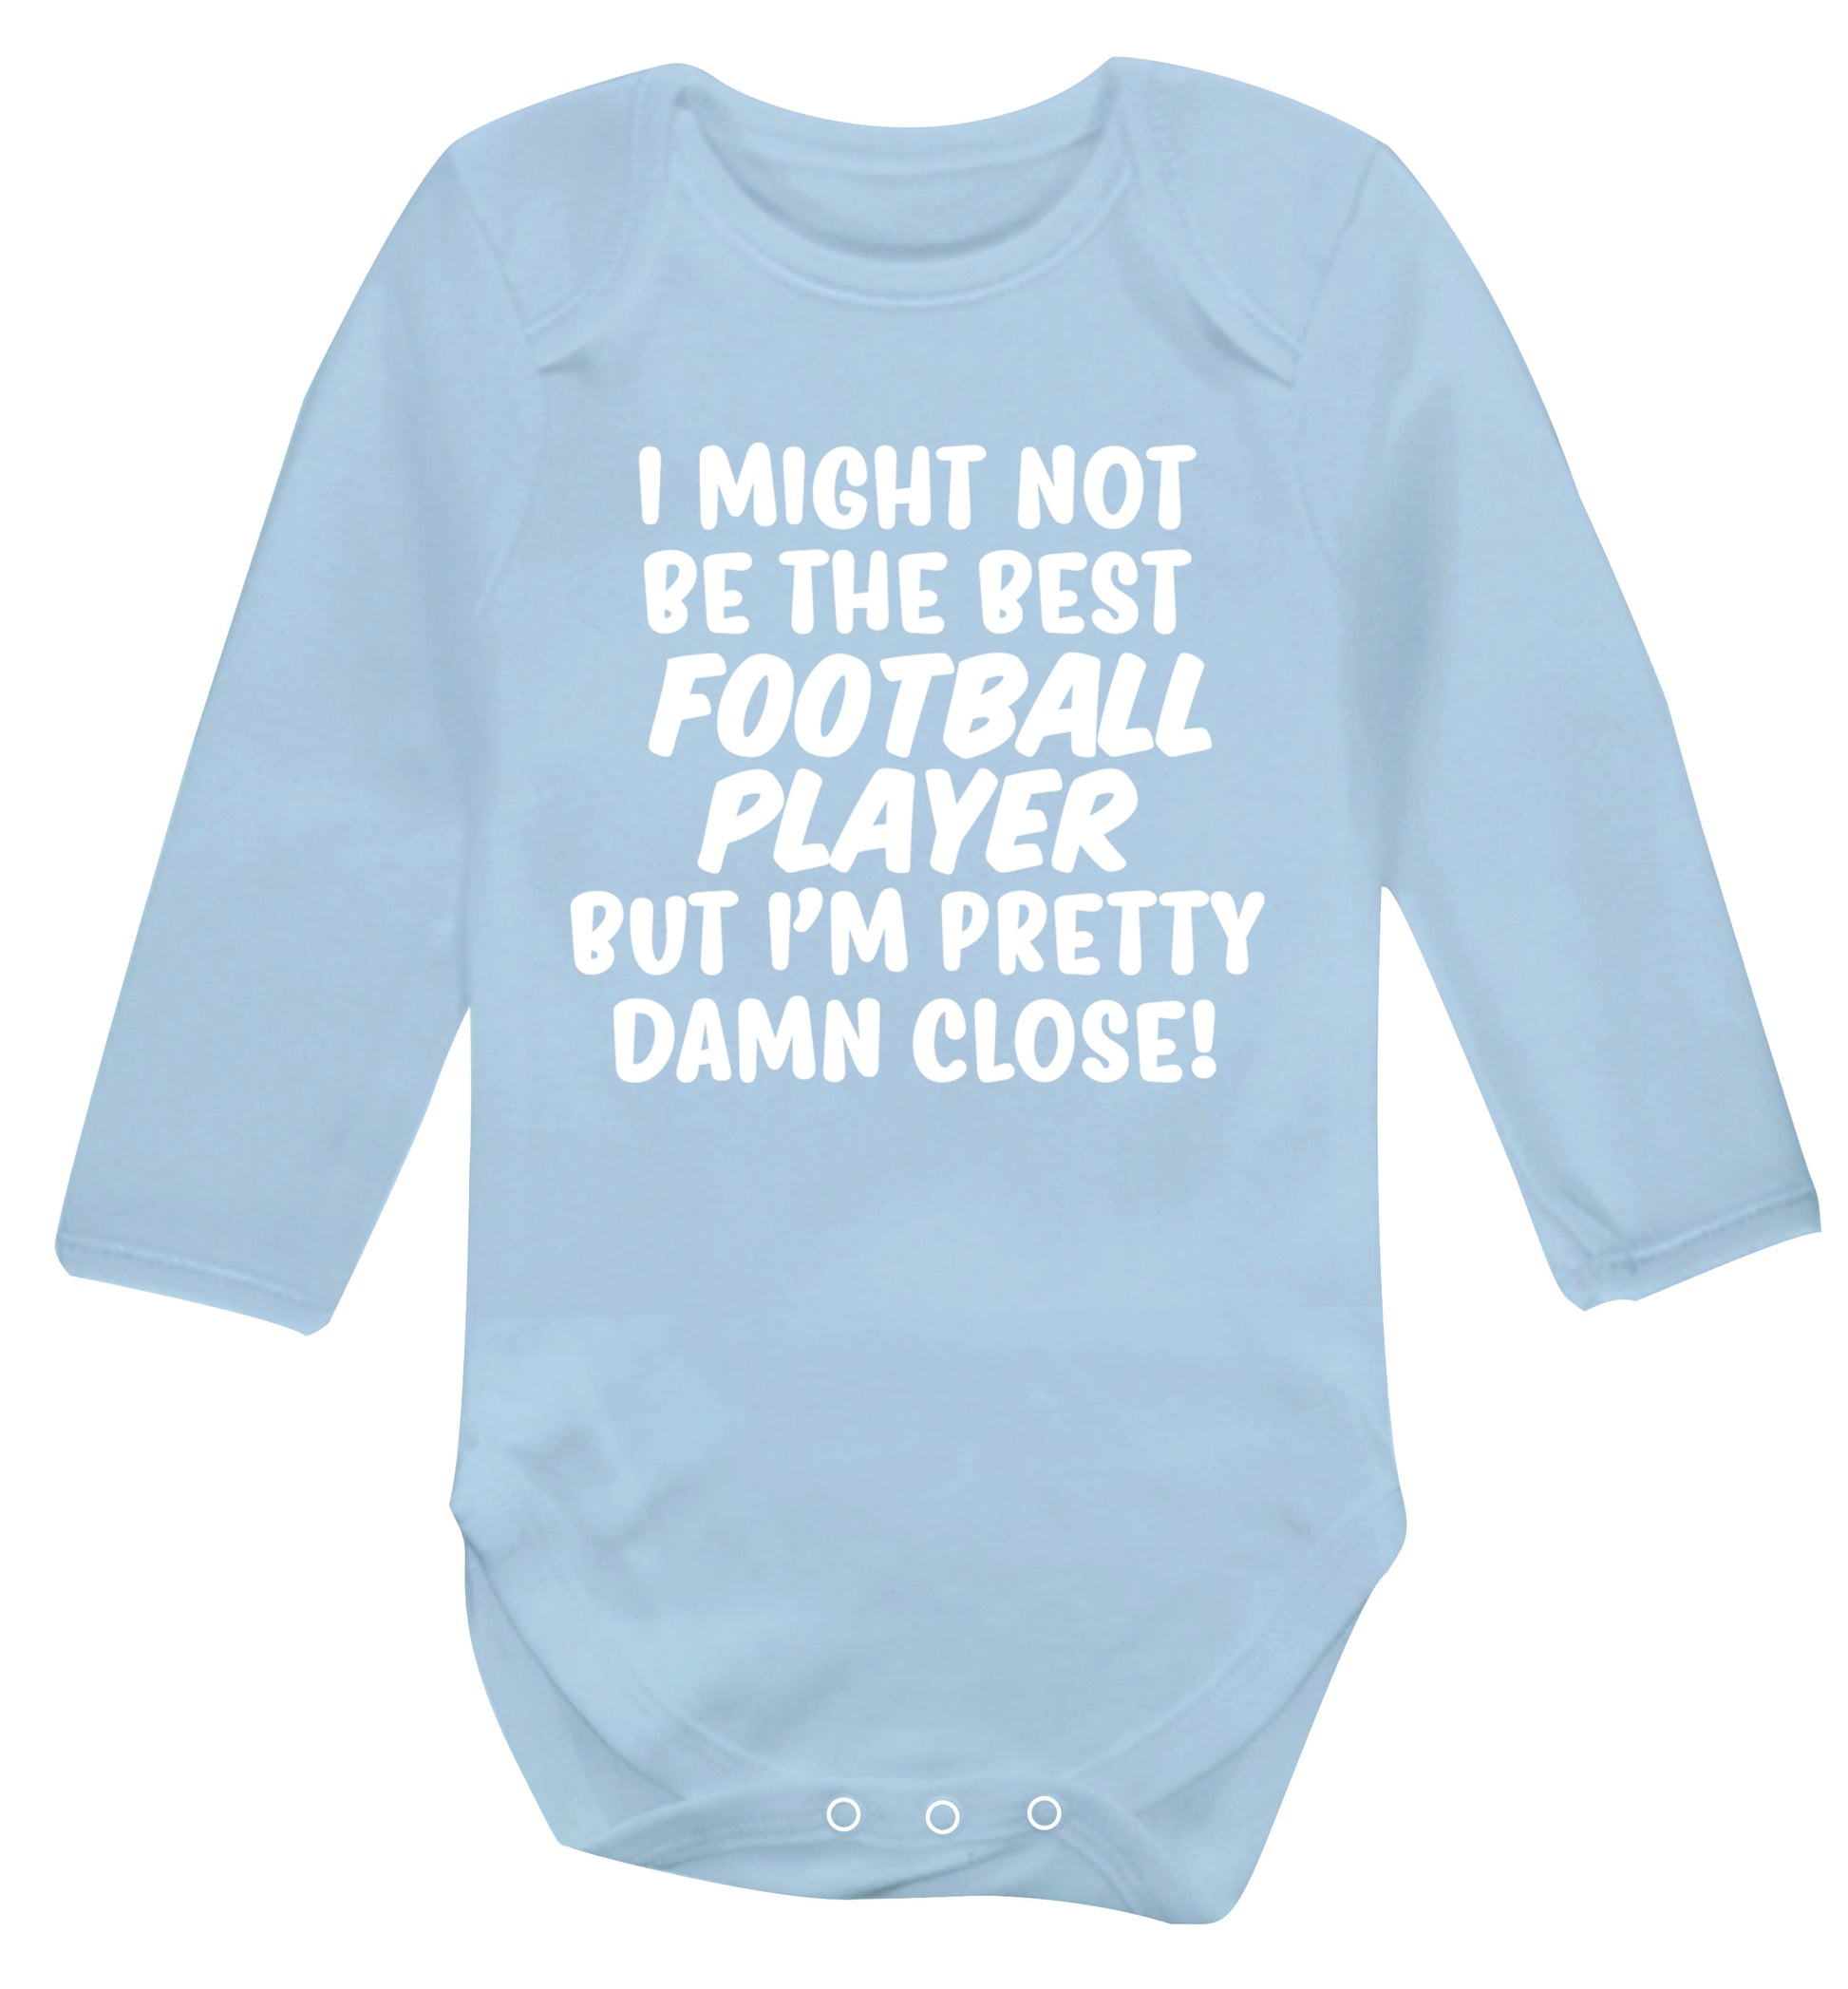 I might not be the best football player but I'm pretty close! Baby Vest long sleeved pale blue 6-12 months